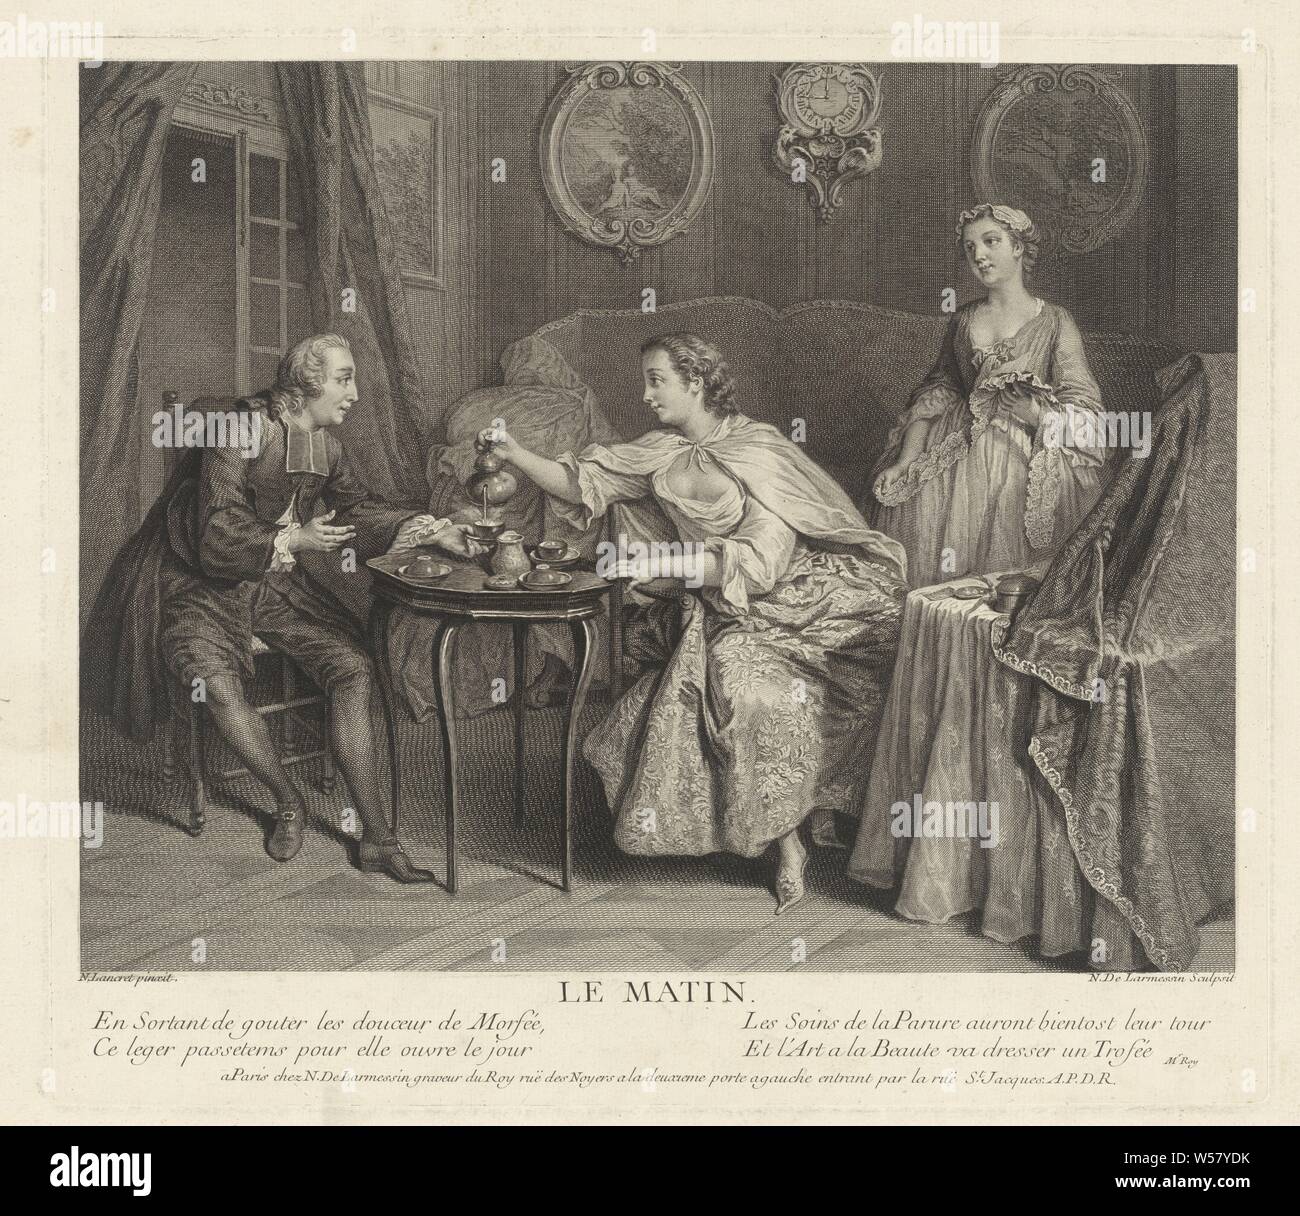 Le Matin, Nicolas de Larmessin (III) (mentioned on object), 1741, paper, engraving, h 330 mm × w 374 mm Stock Photo